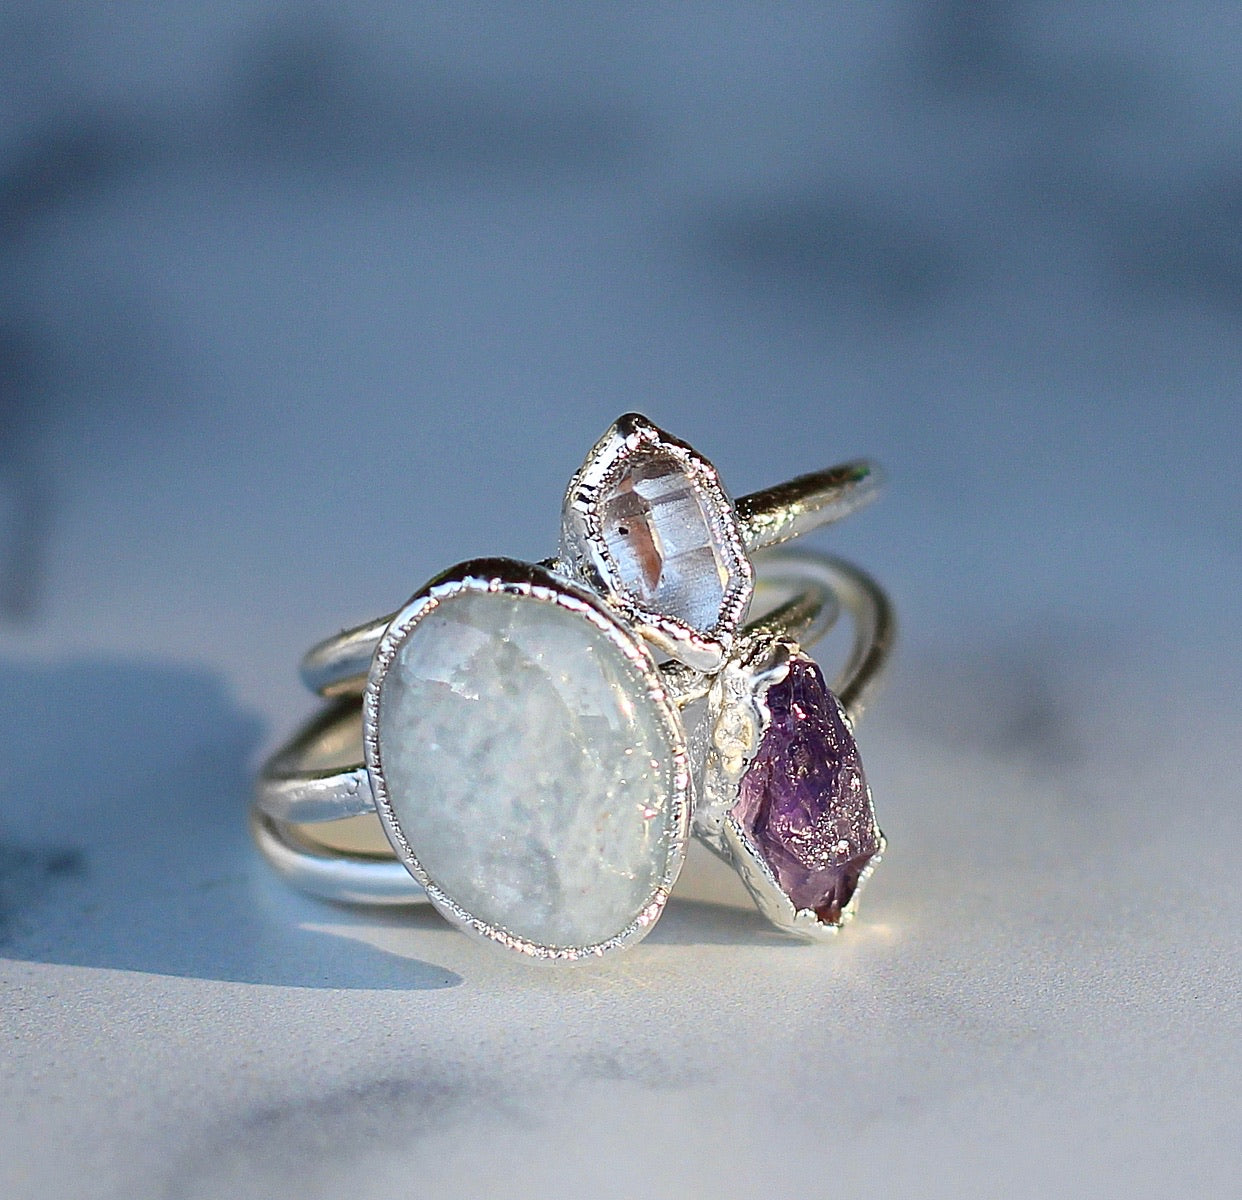 Raw Amethyst Stacking Ring in Sterling Silver